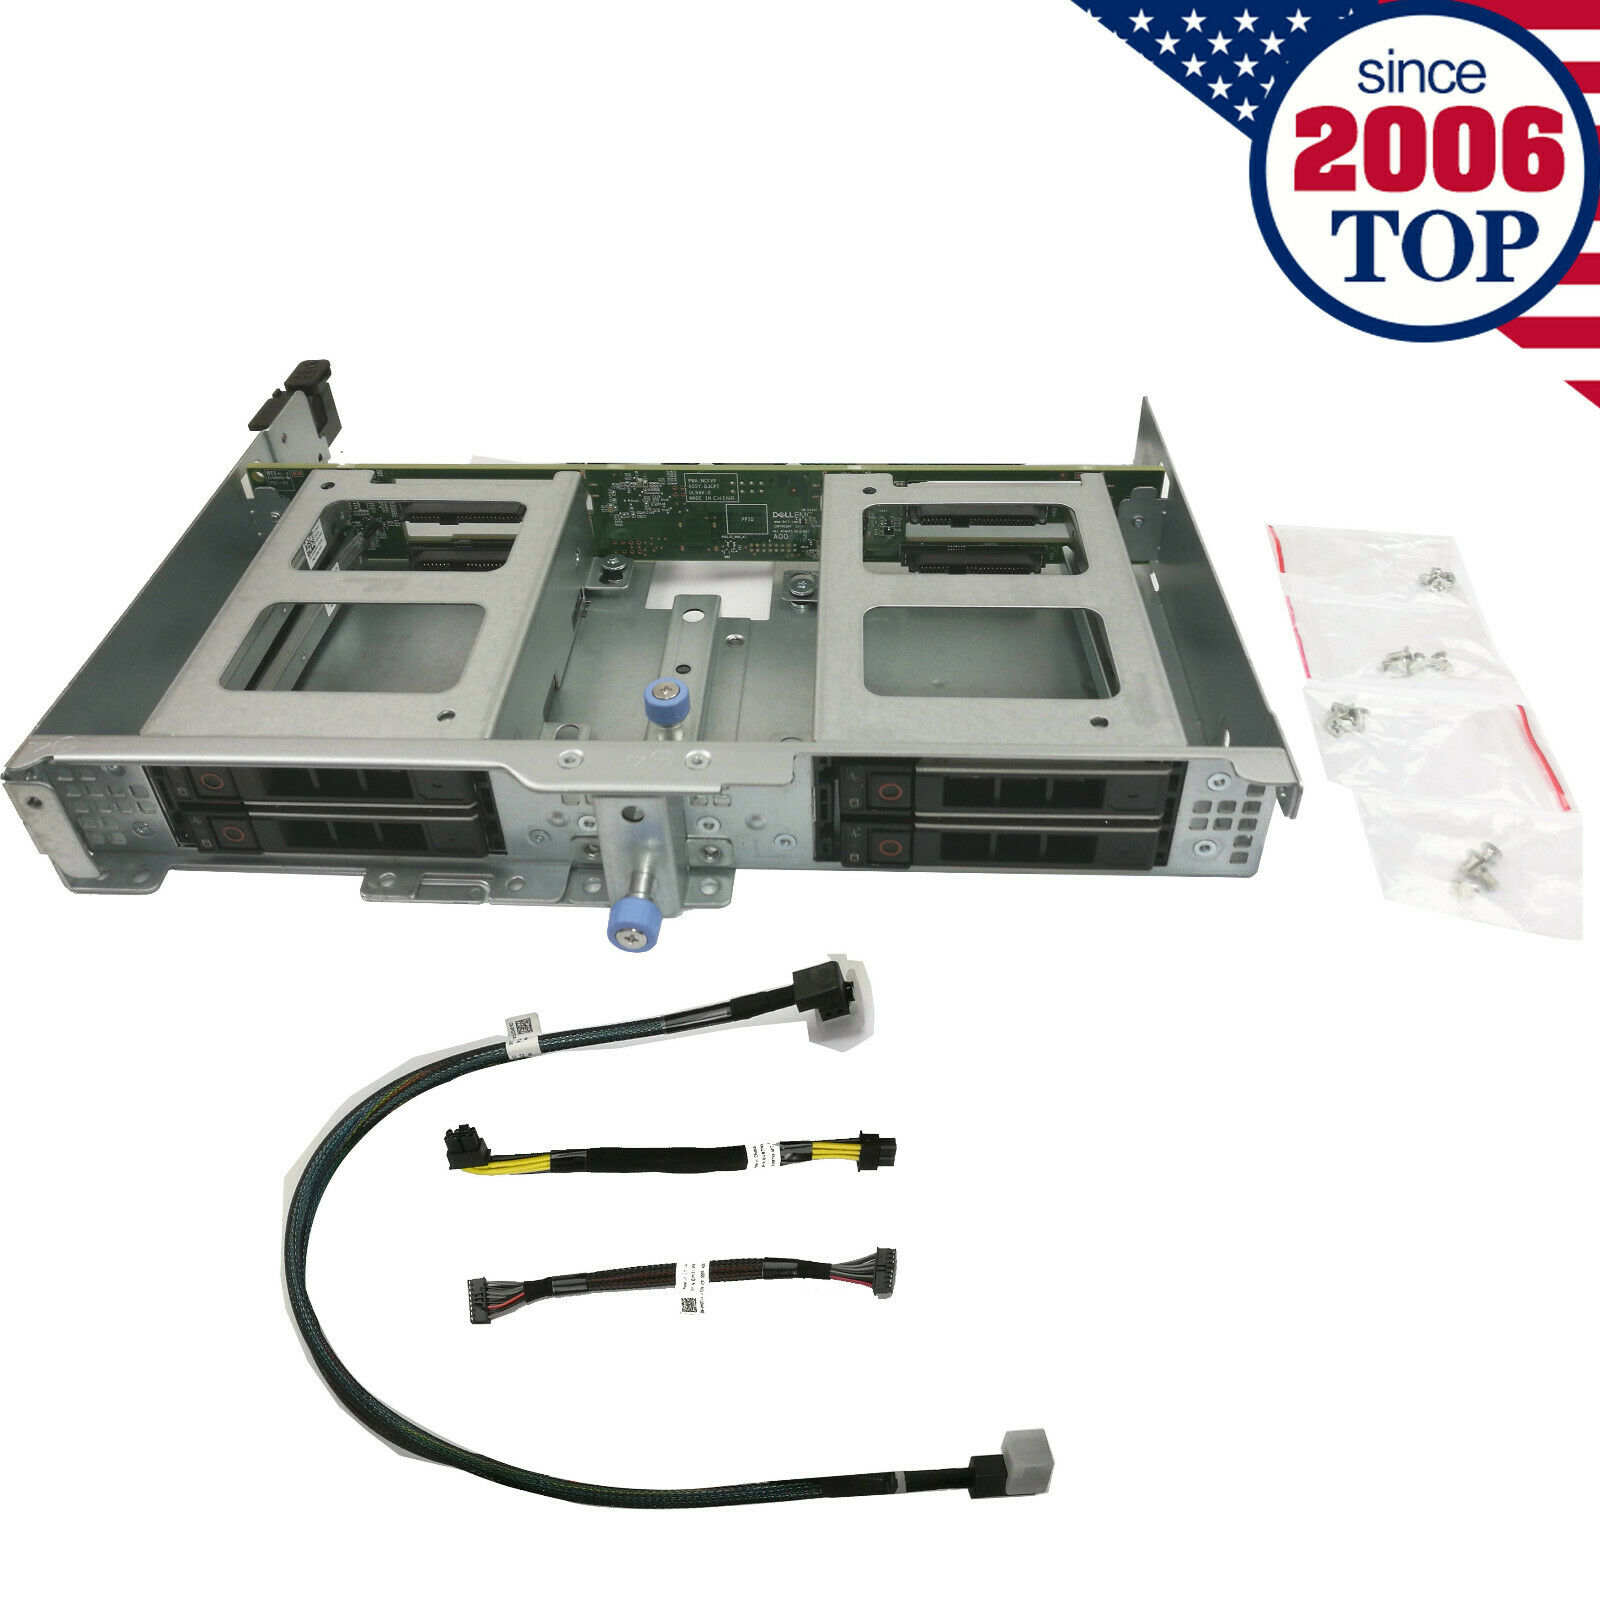 Dell R740XD 4*2.5inch Rear HDD Cage Back Panel Kit WMJR0 w/Caddy Cables US Stock